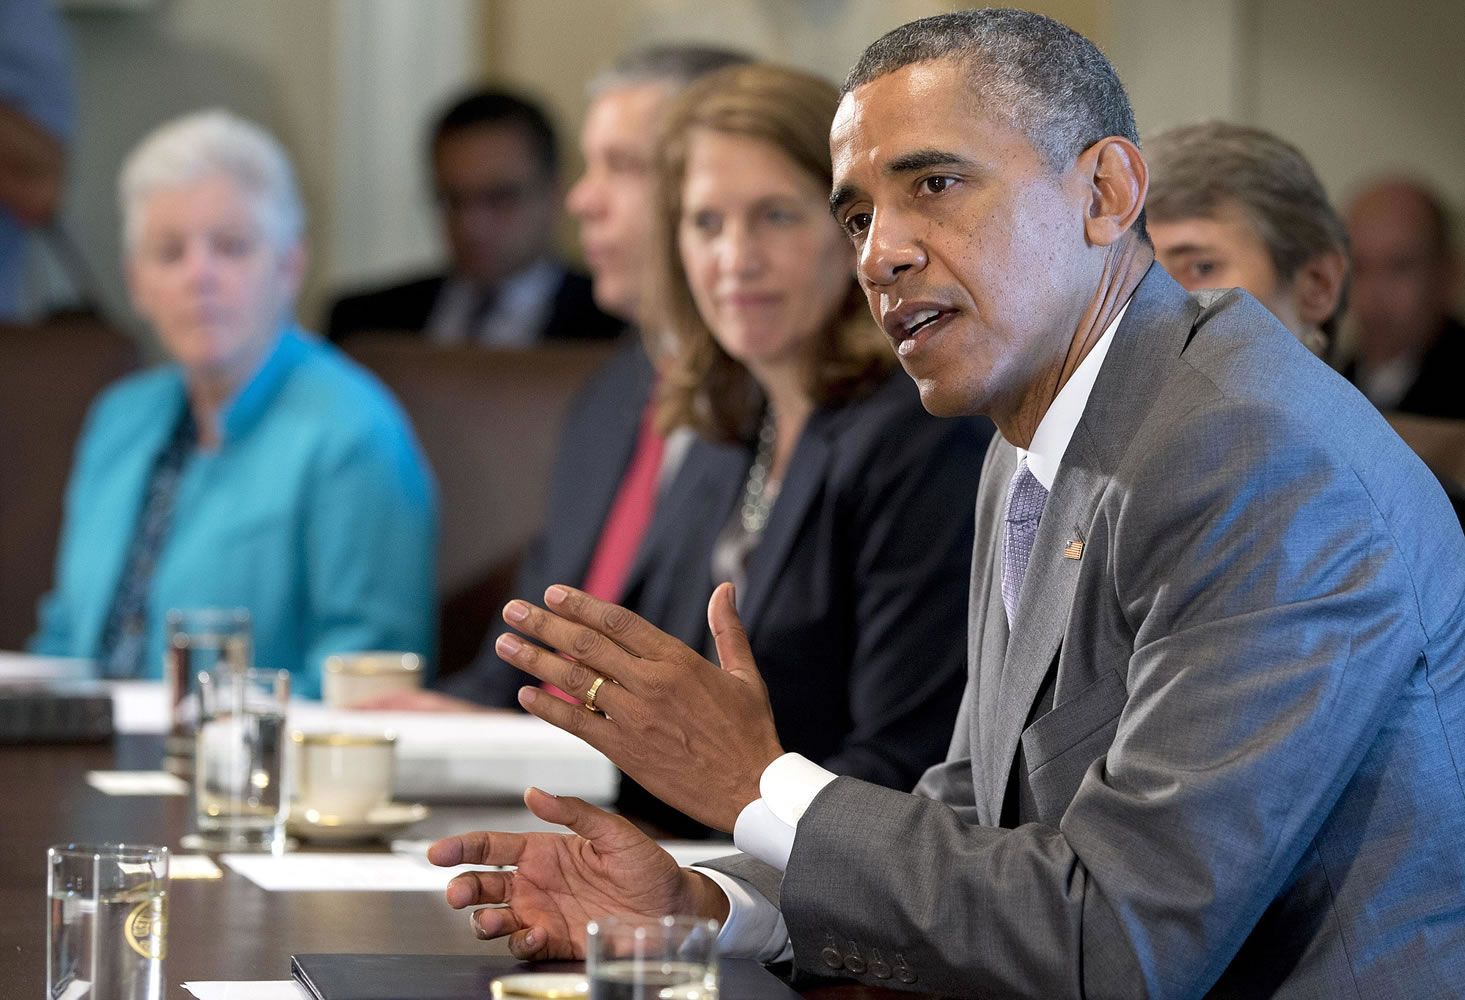 President Barack Obama speaks to the media during a meeting with his cabinet members in the Cabinet Room of the White House in Washington on Tuesday.